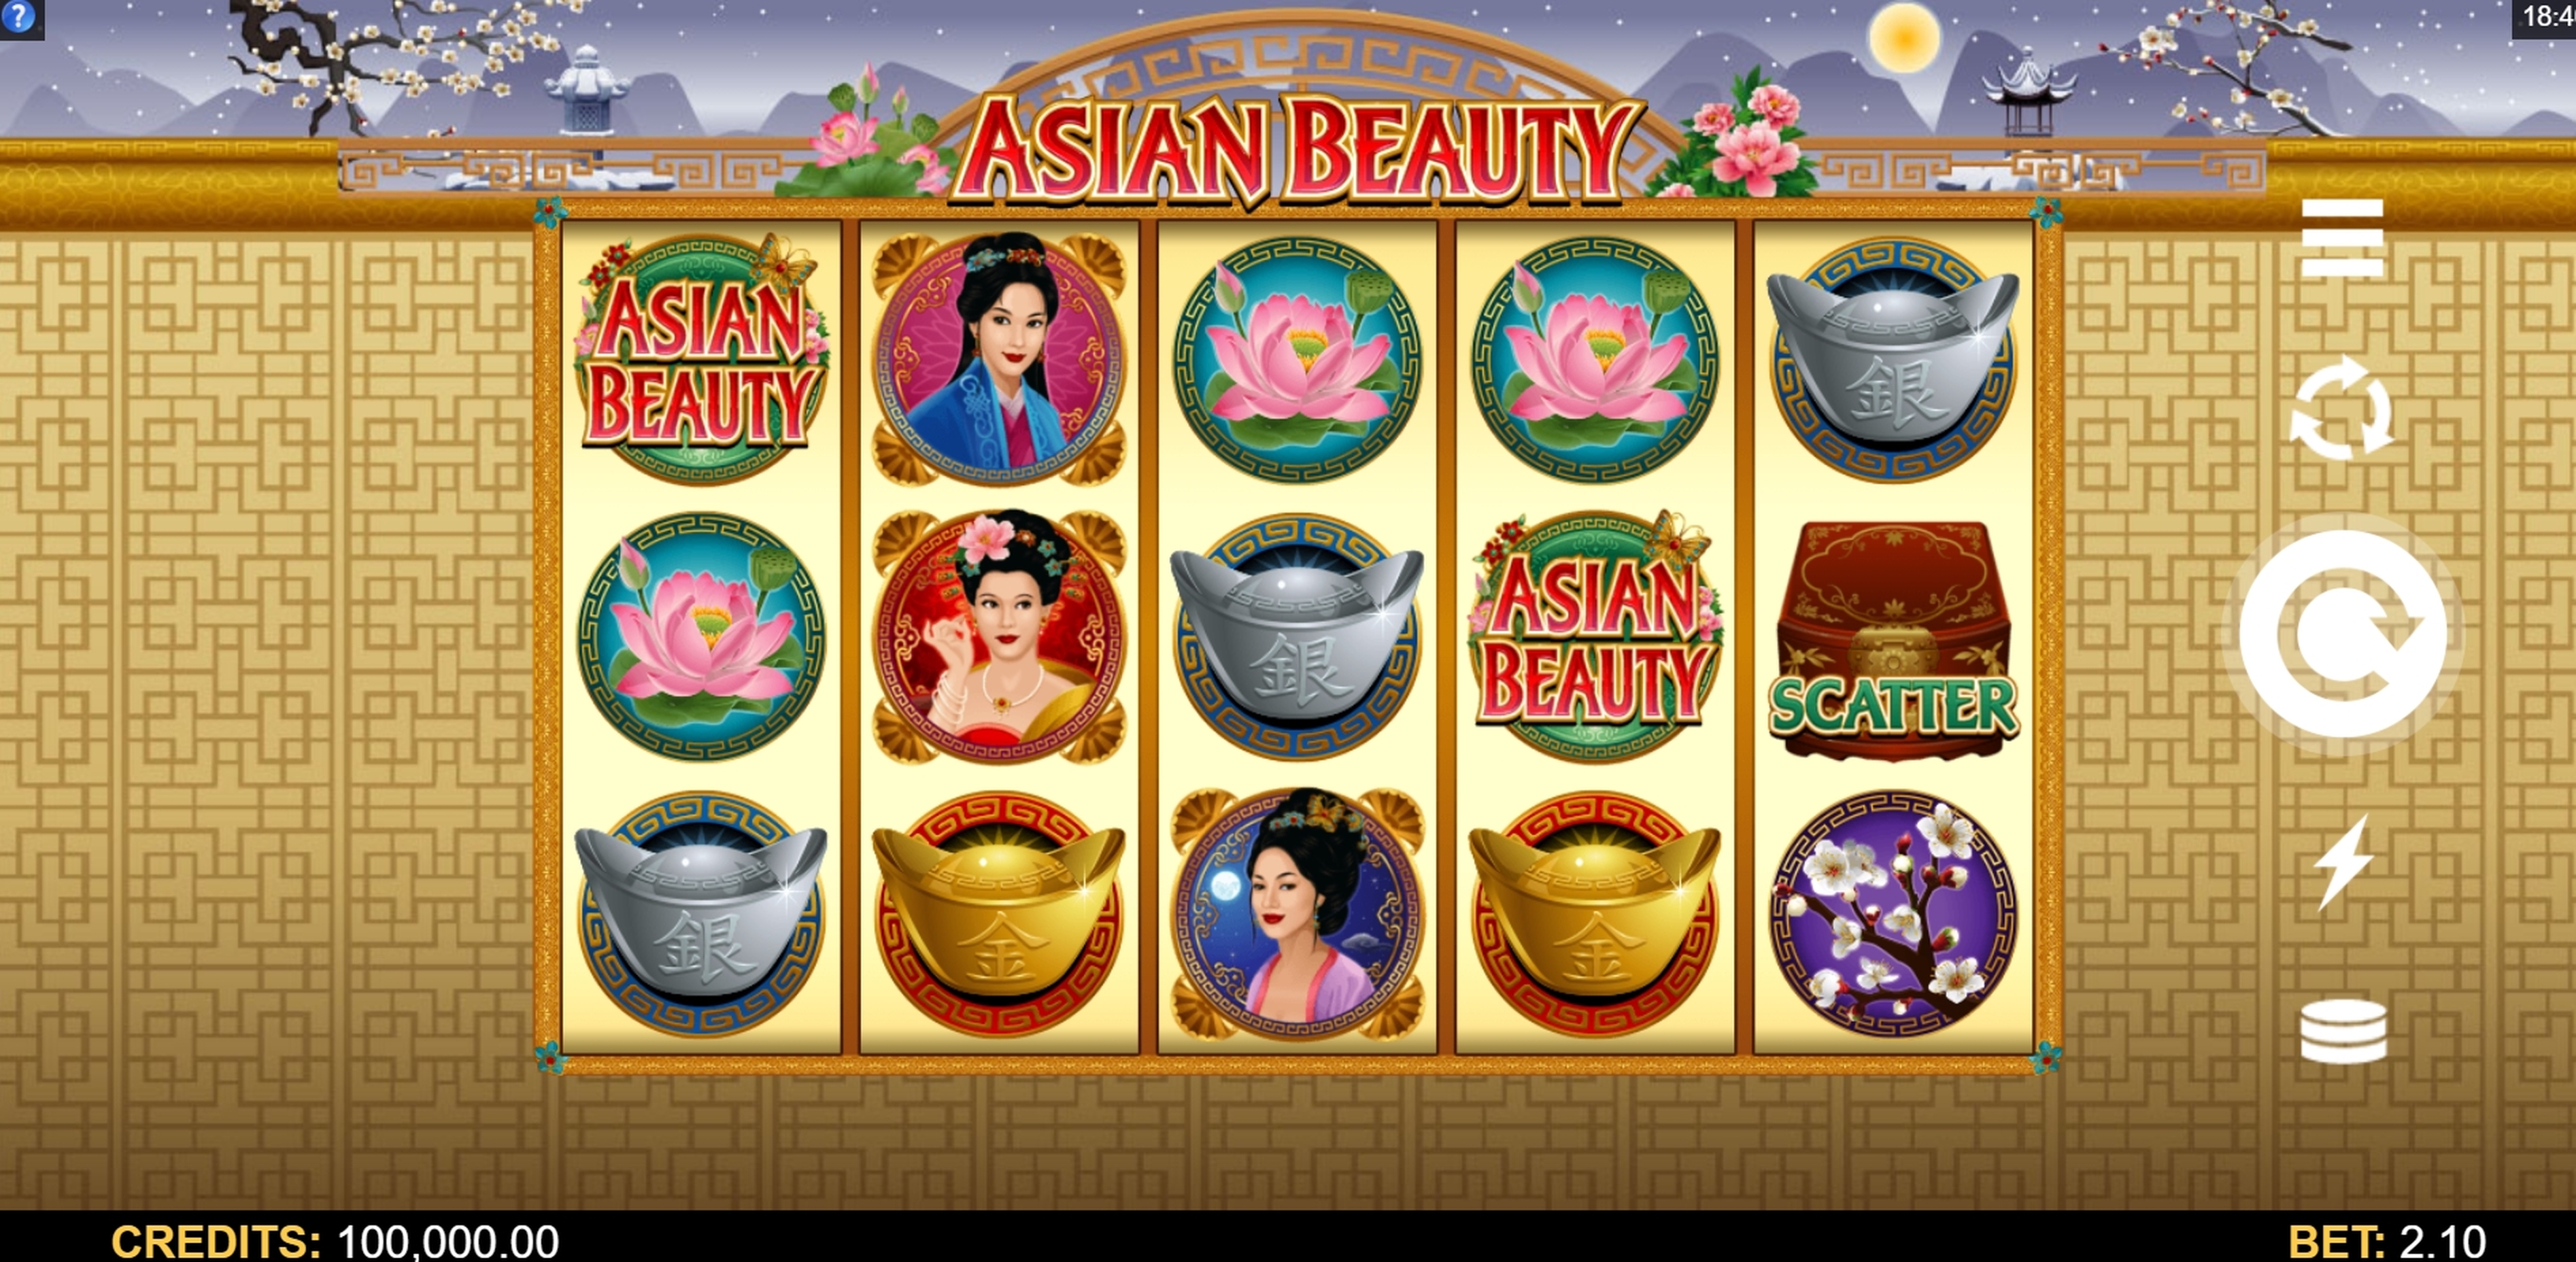 Reels in Asian Beauty Slot Game by Microgaming